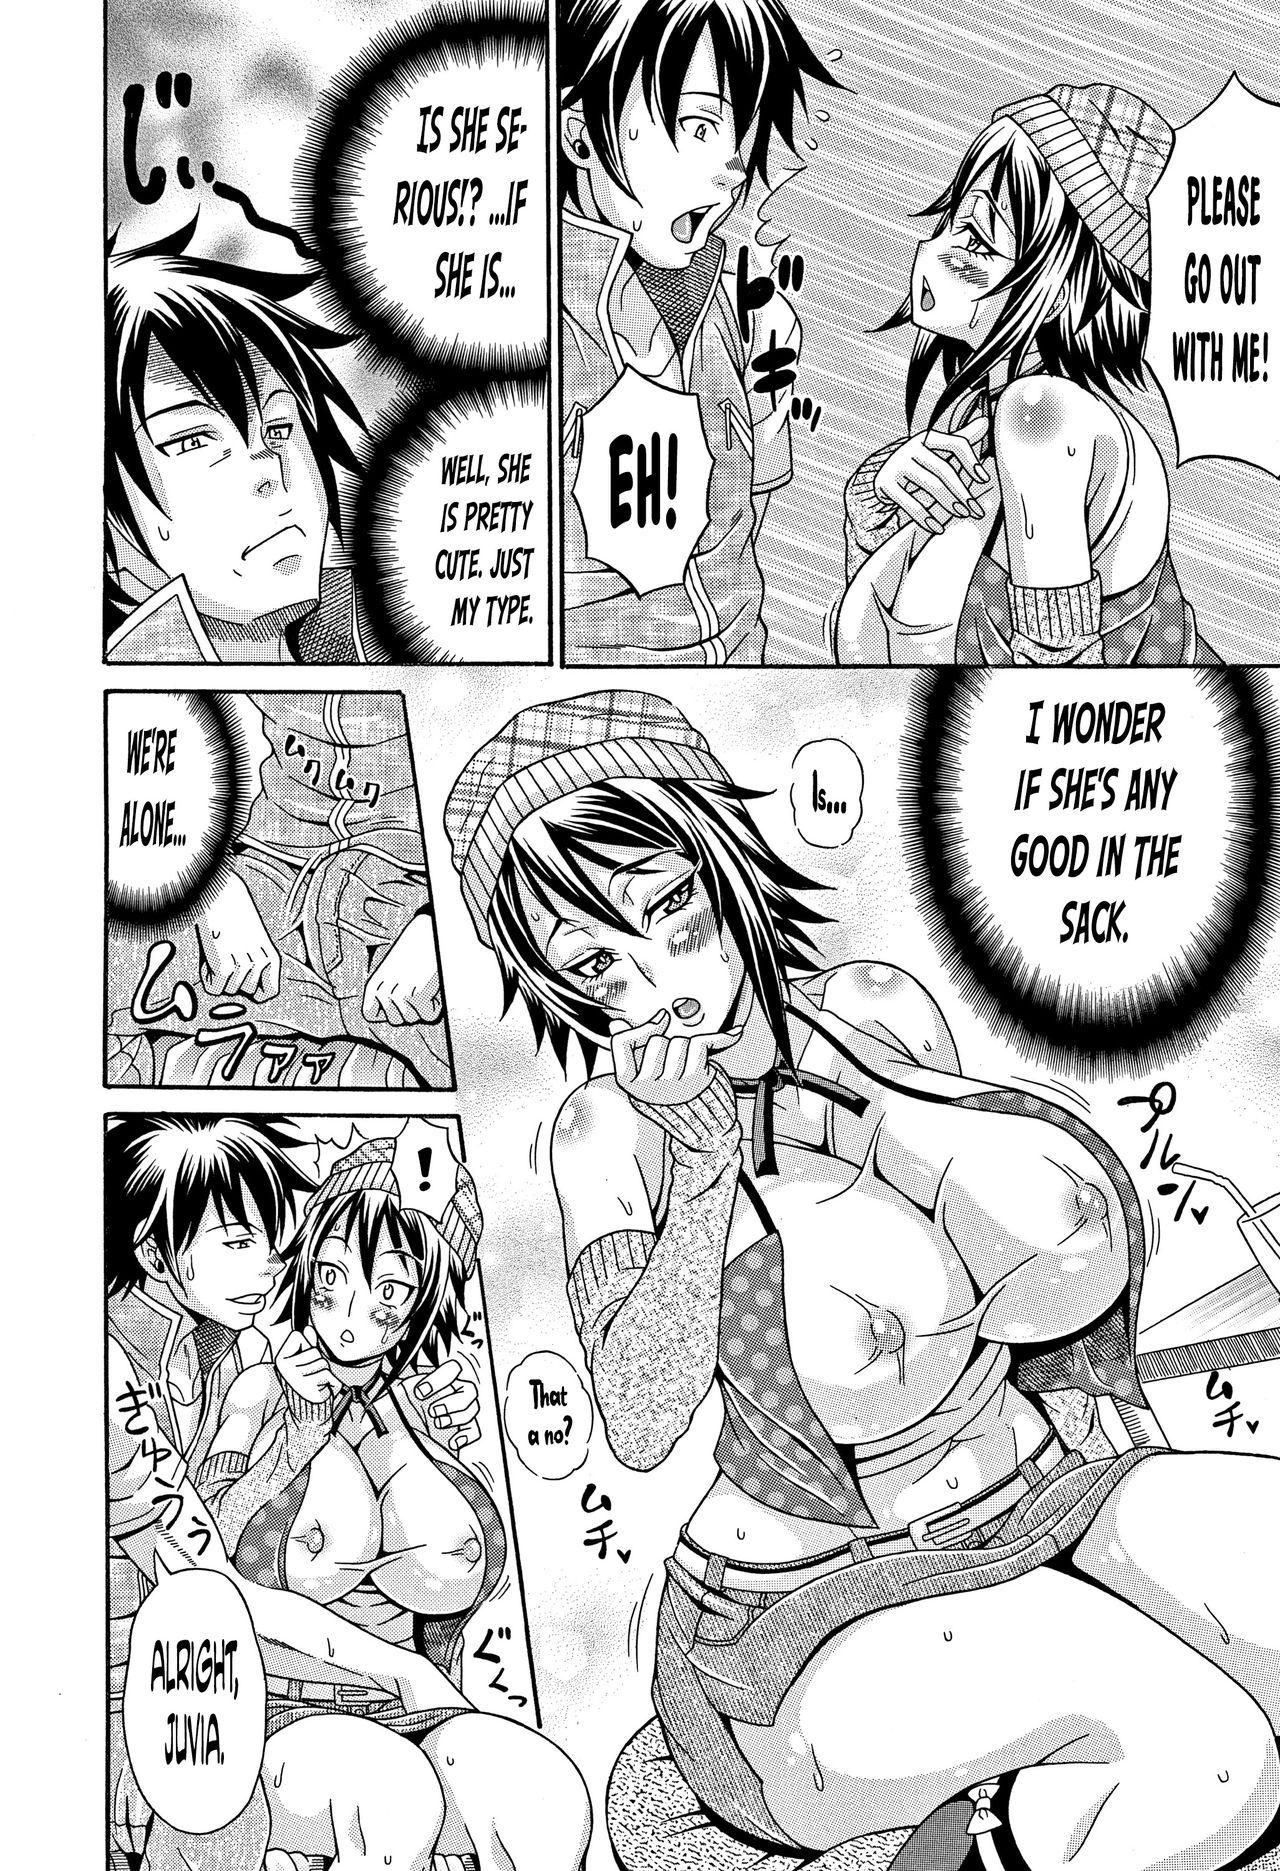 [Andou Hiroyuki] Mamire Chichi - Sticky Tits Feel Hot All Over. Ch.1-7 [English] [doujin-moe.us] 58